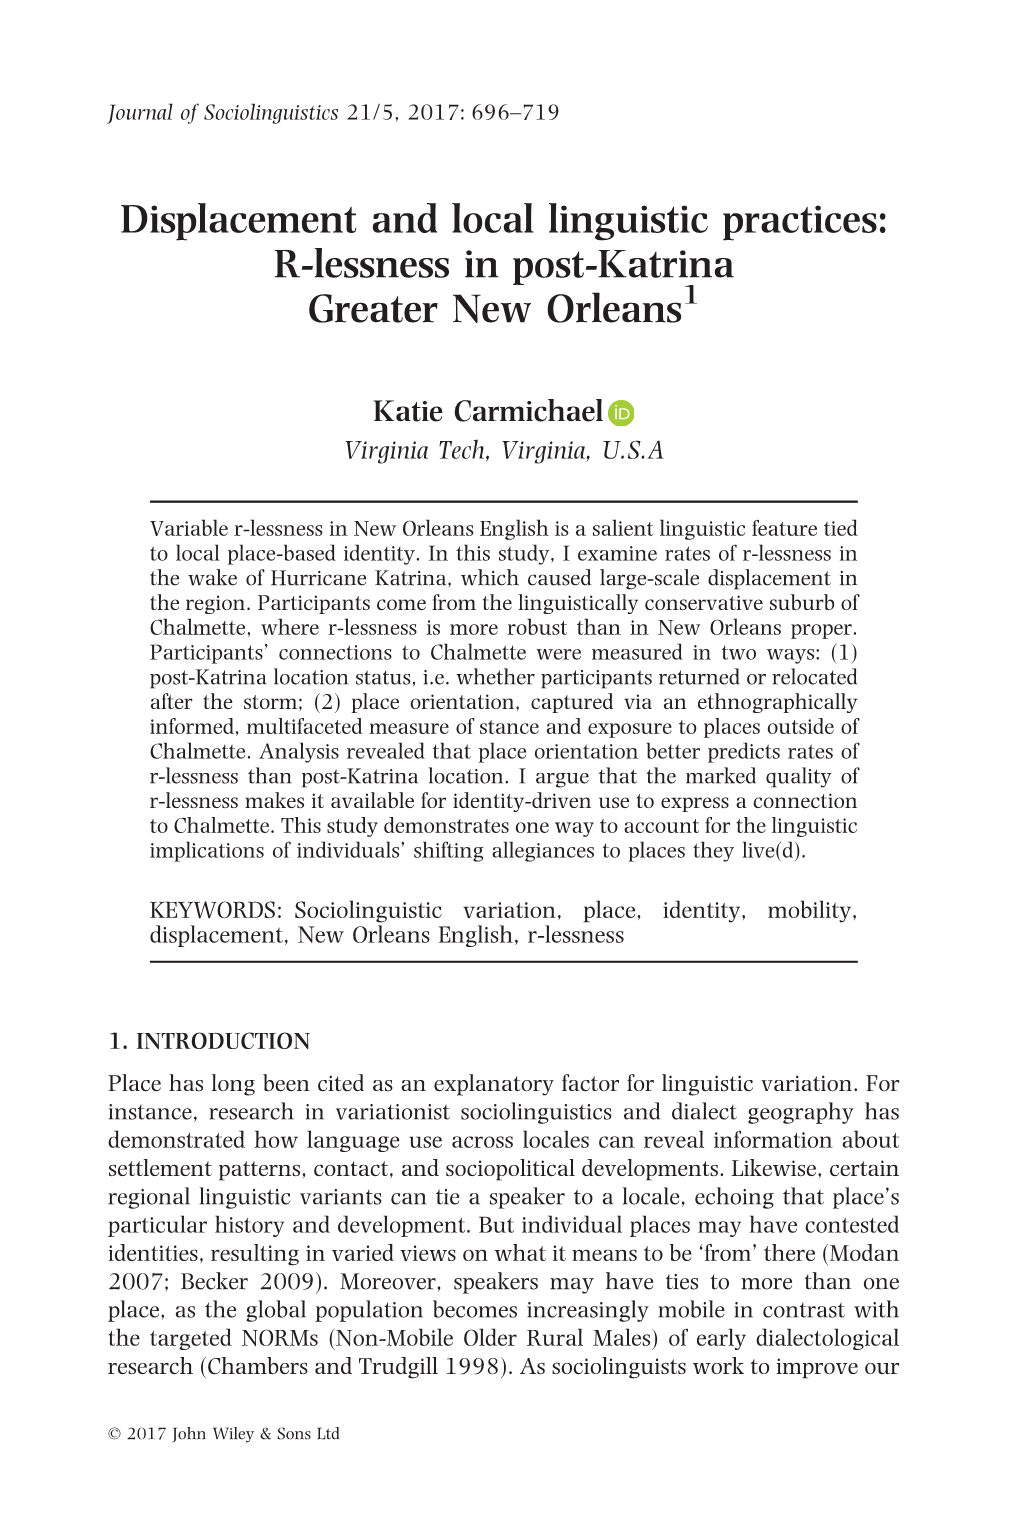 R‐Lessness in Post‐Katrina Greater New Orleans